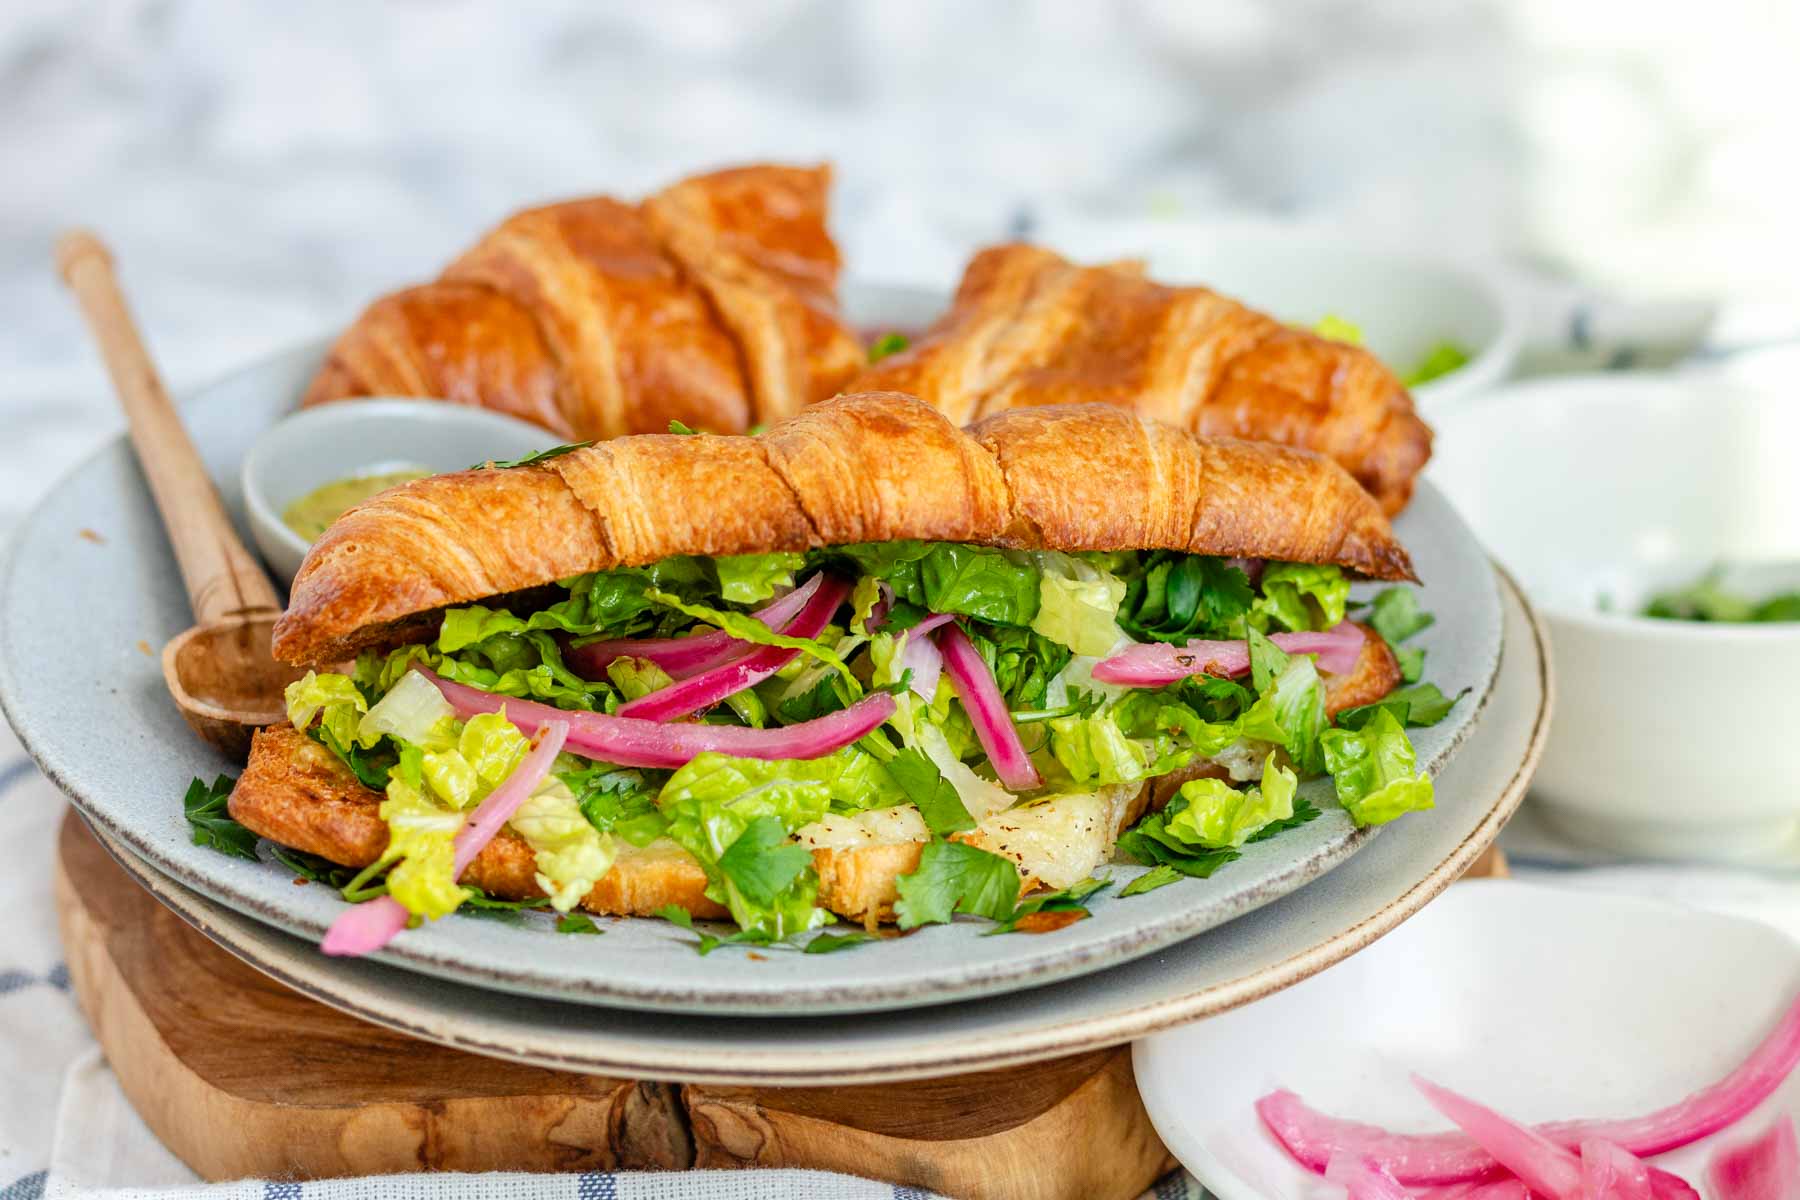 A croissant sandwich with cheese, lettuce, and pickled red onions.